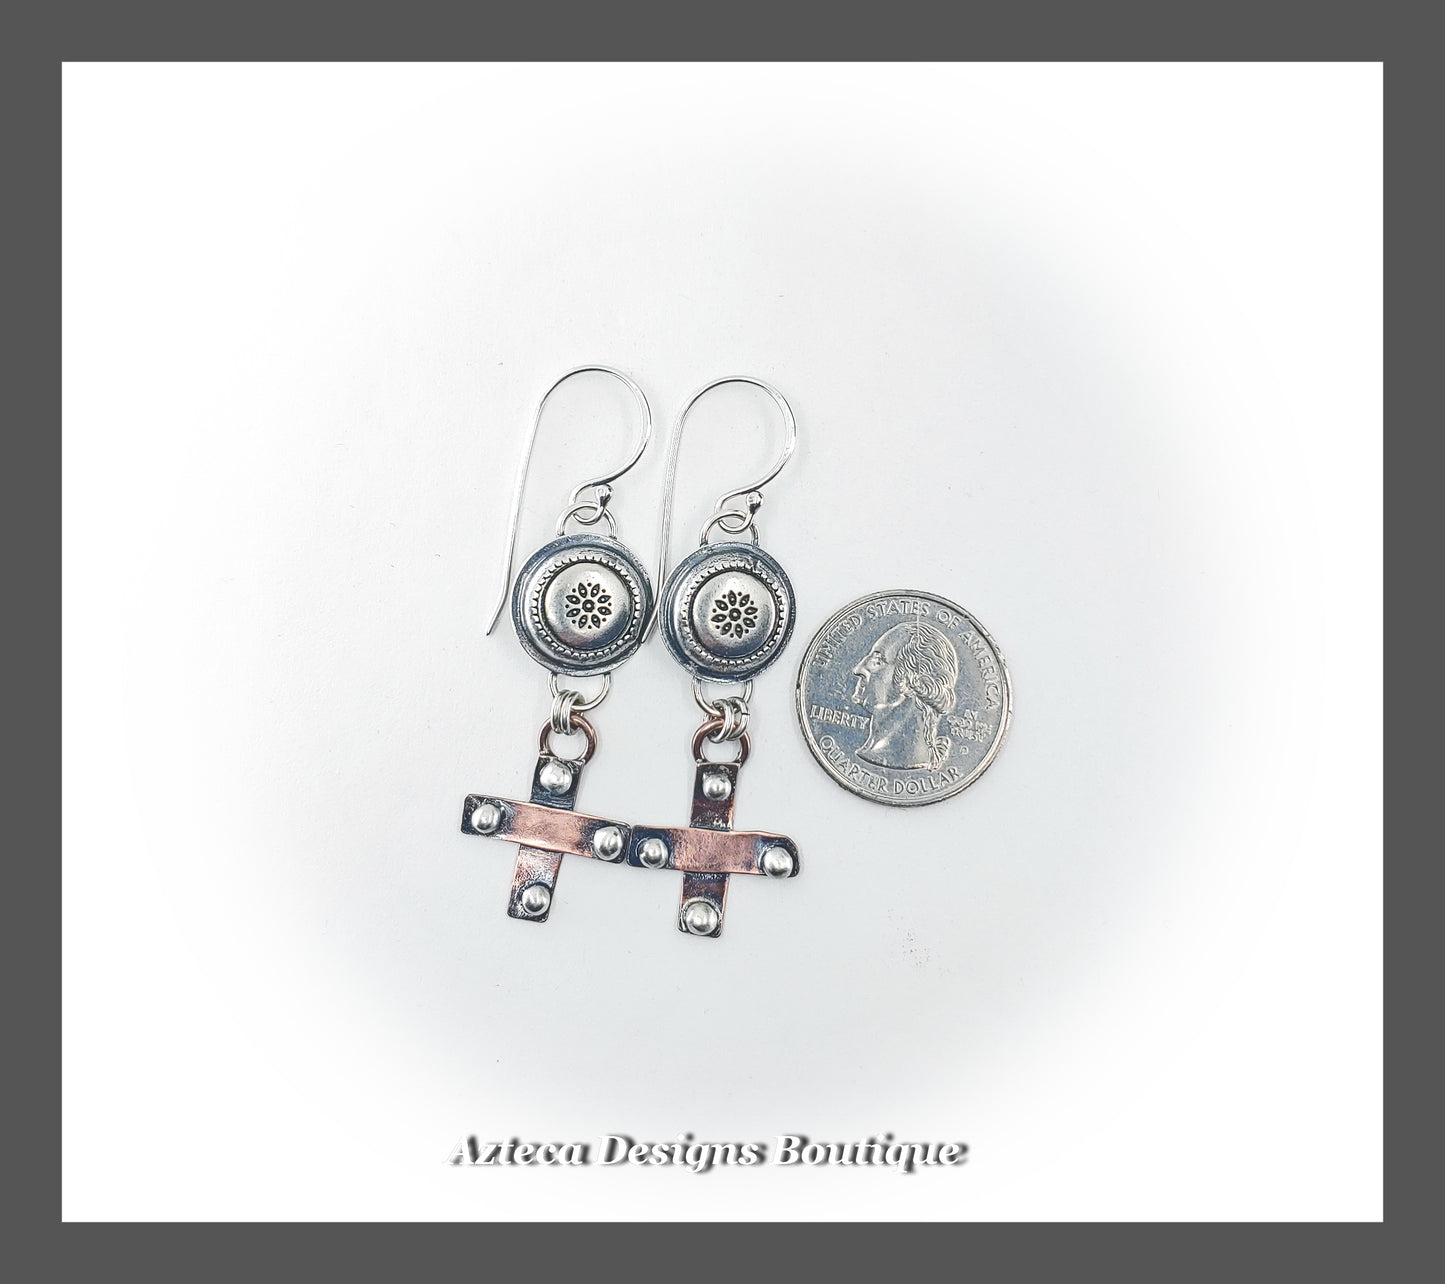 Southwest Copper Cross + Buttons + Argentium Silver Hand Fabricated Earrings